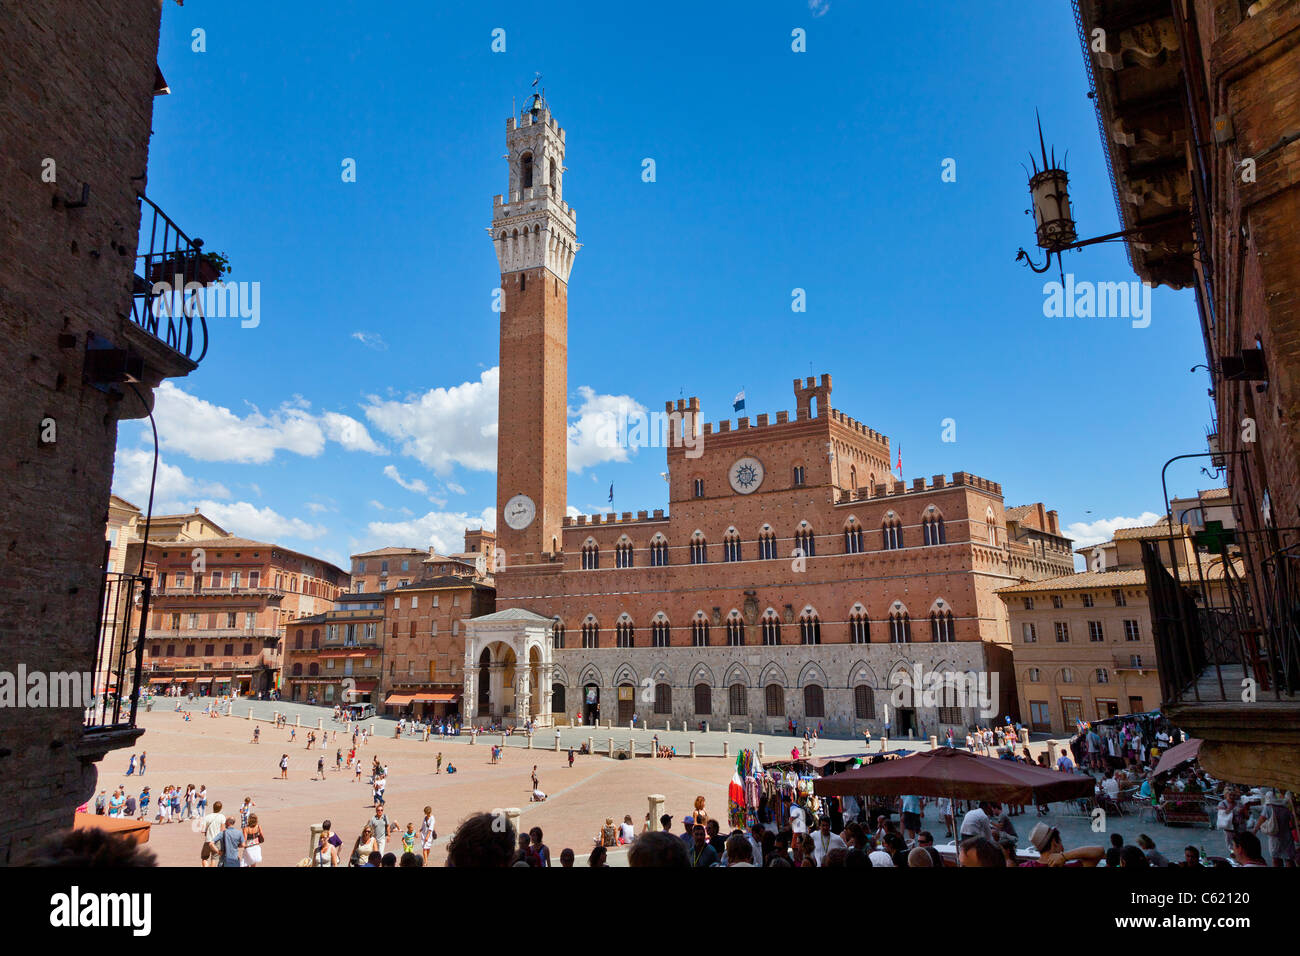 The Torre del Mangia tower in Piazza del Campo,Siena, Italy, Stock Photo